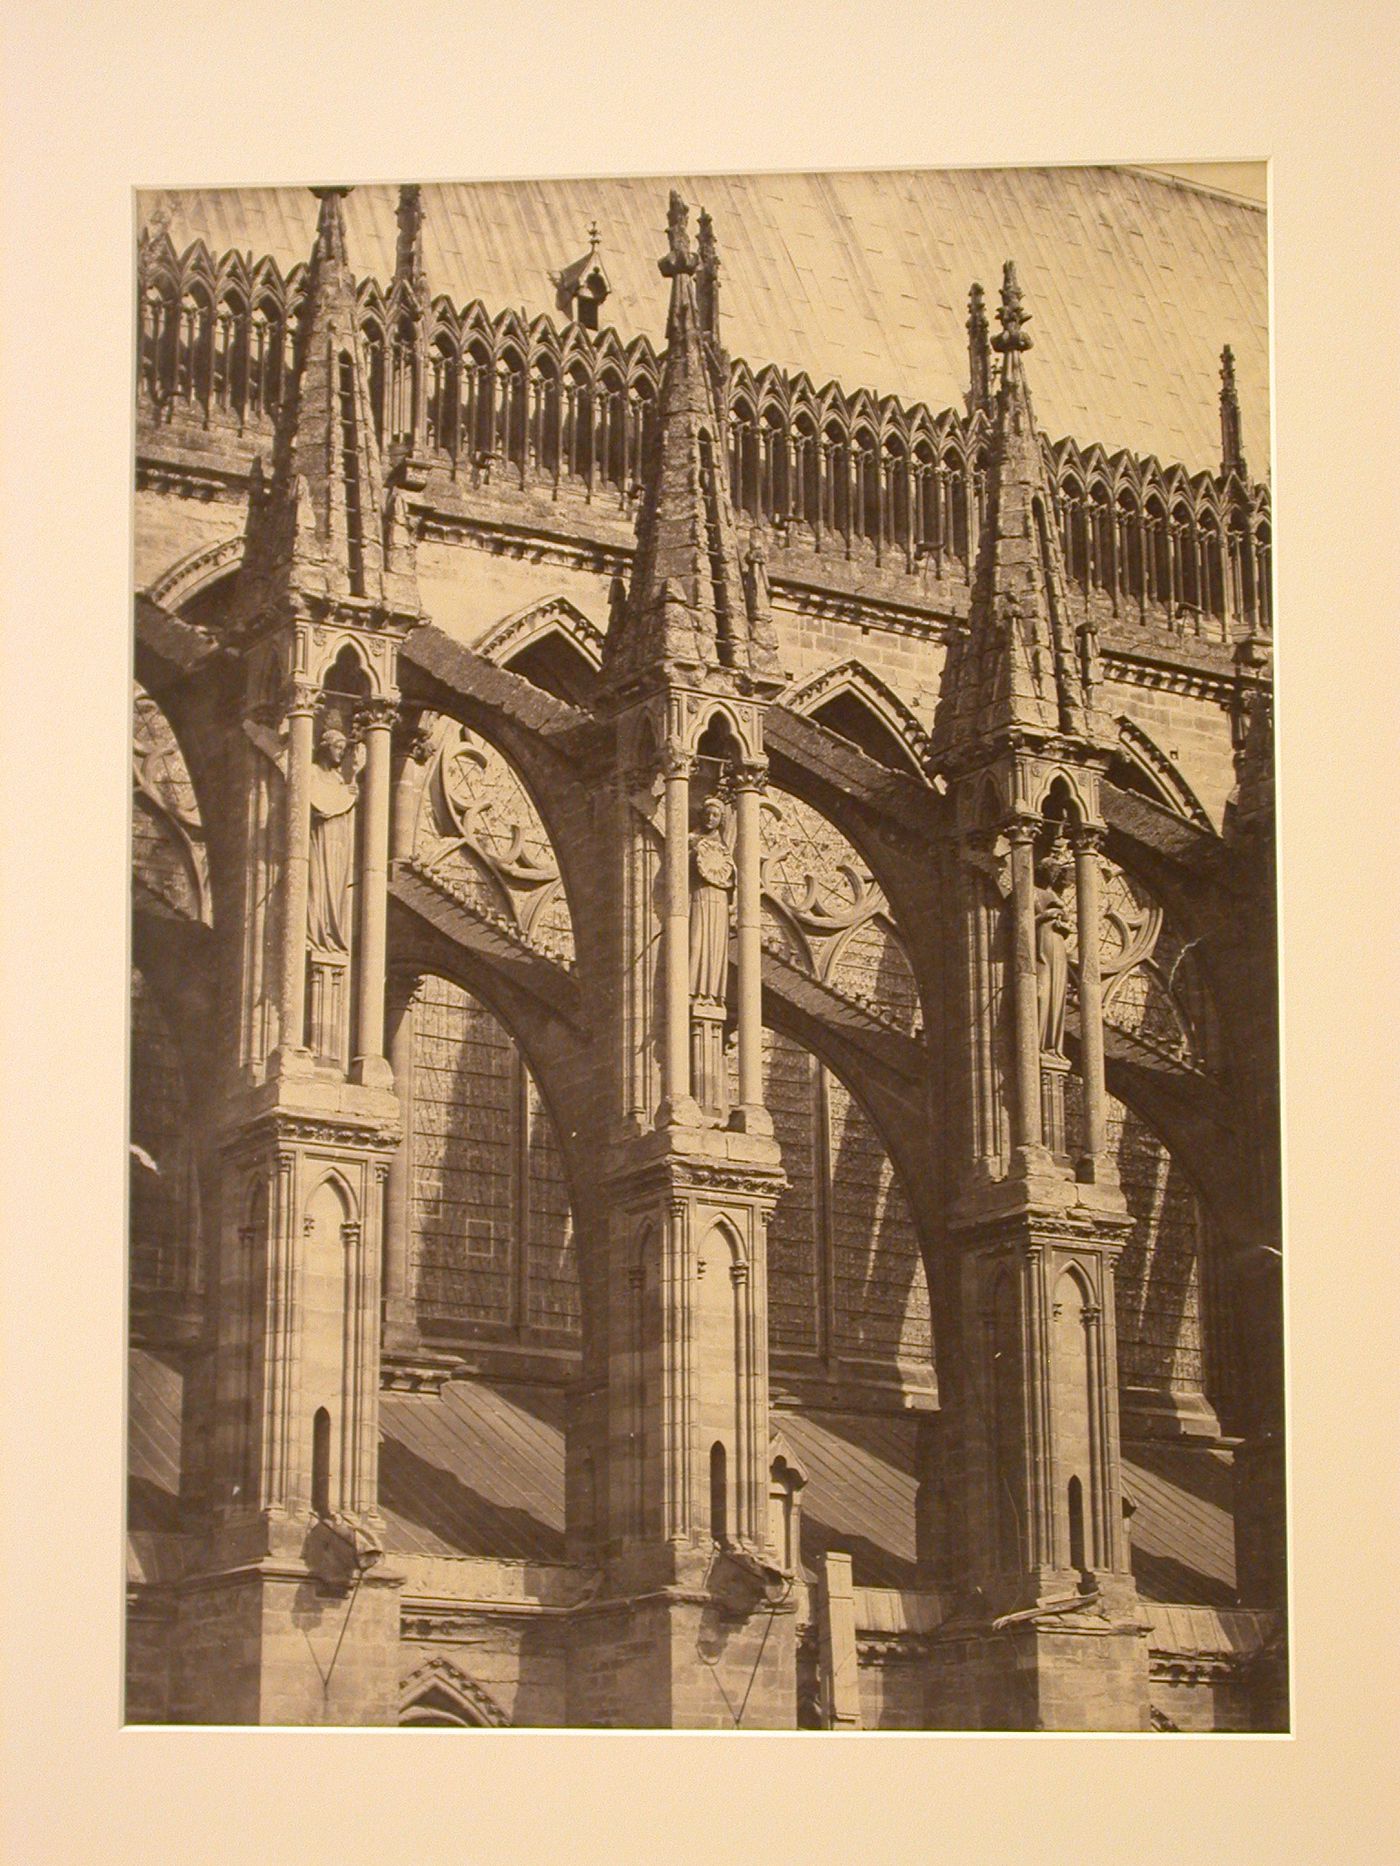 Exterior view, detail of flying buttresses supporting nave, 3 bays, Amiens, France